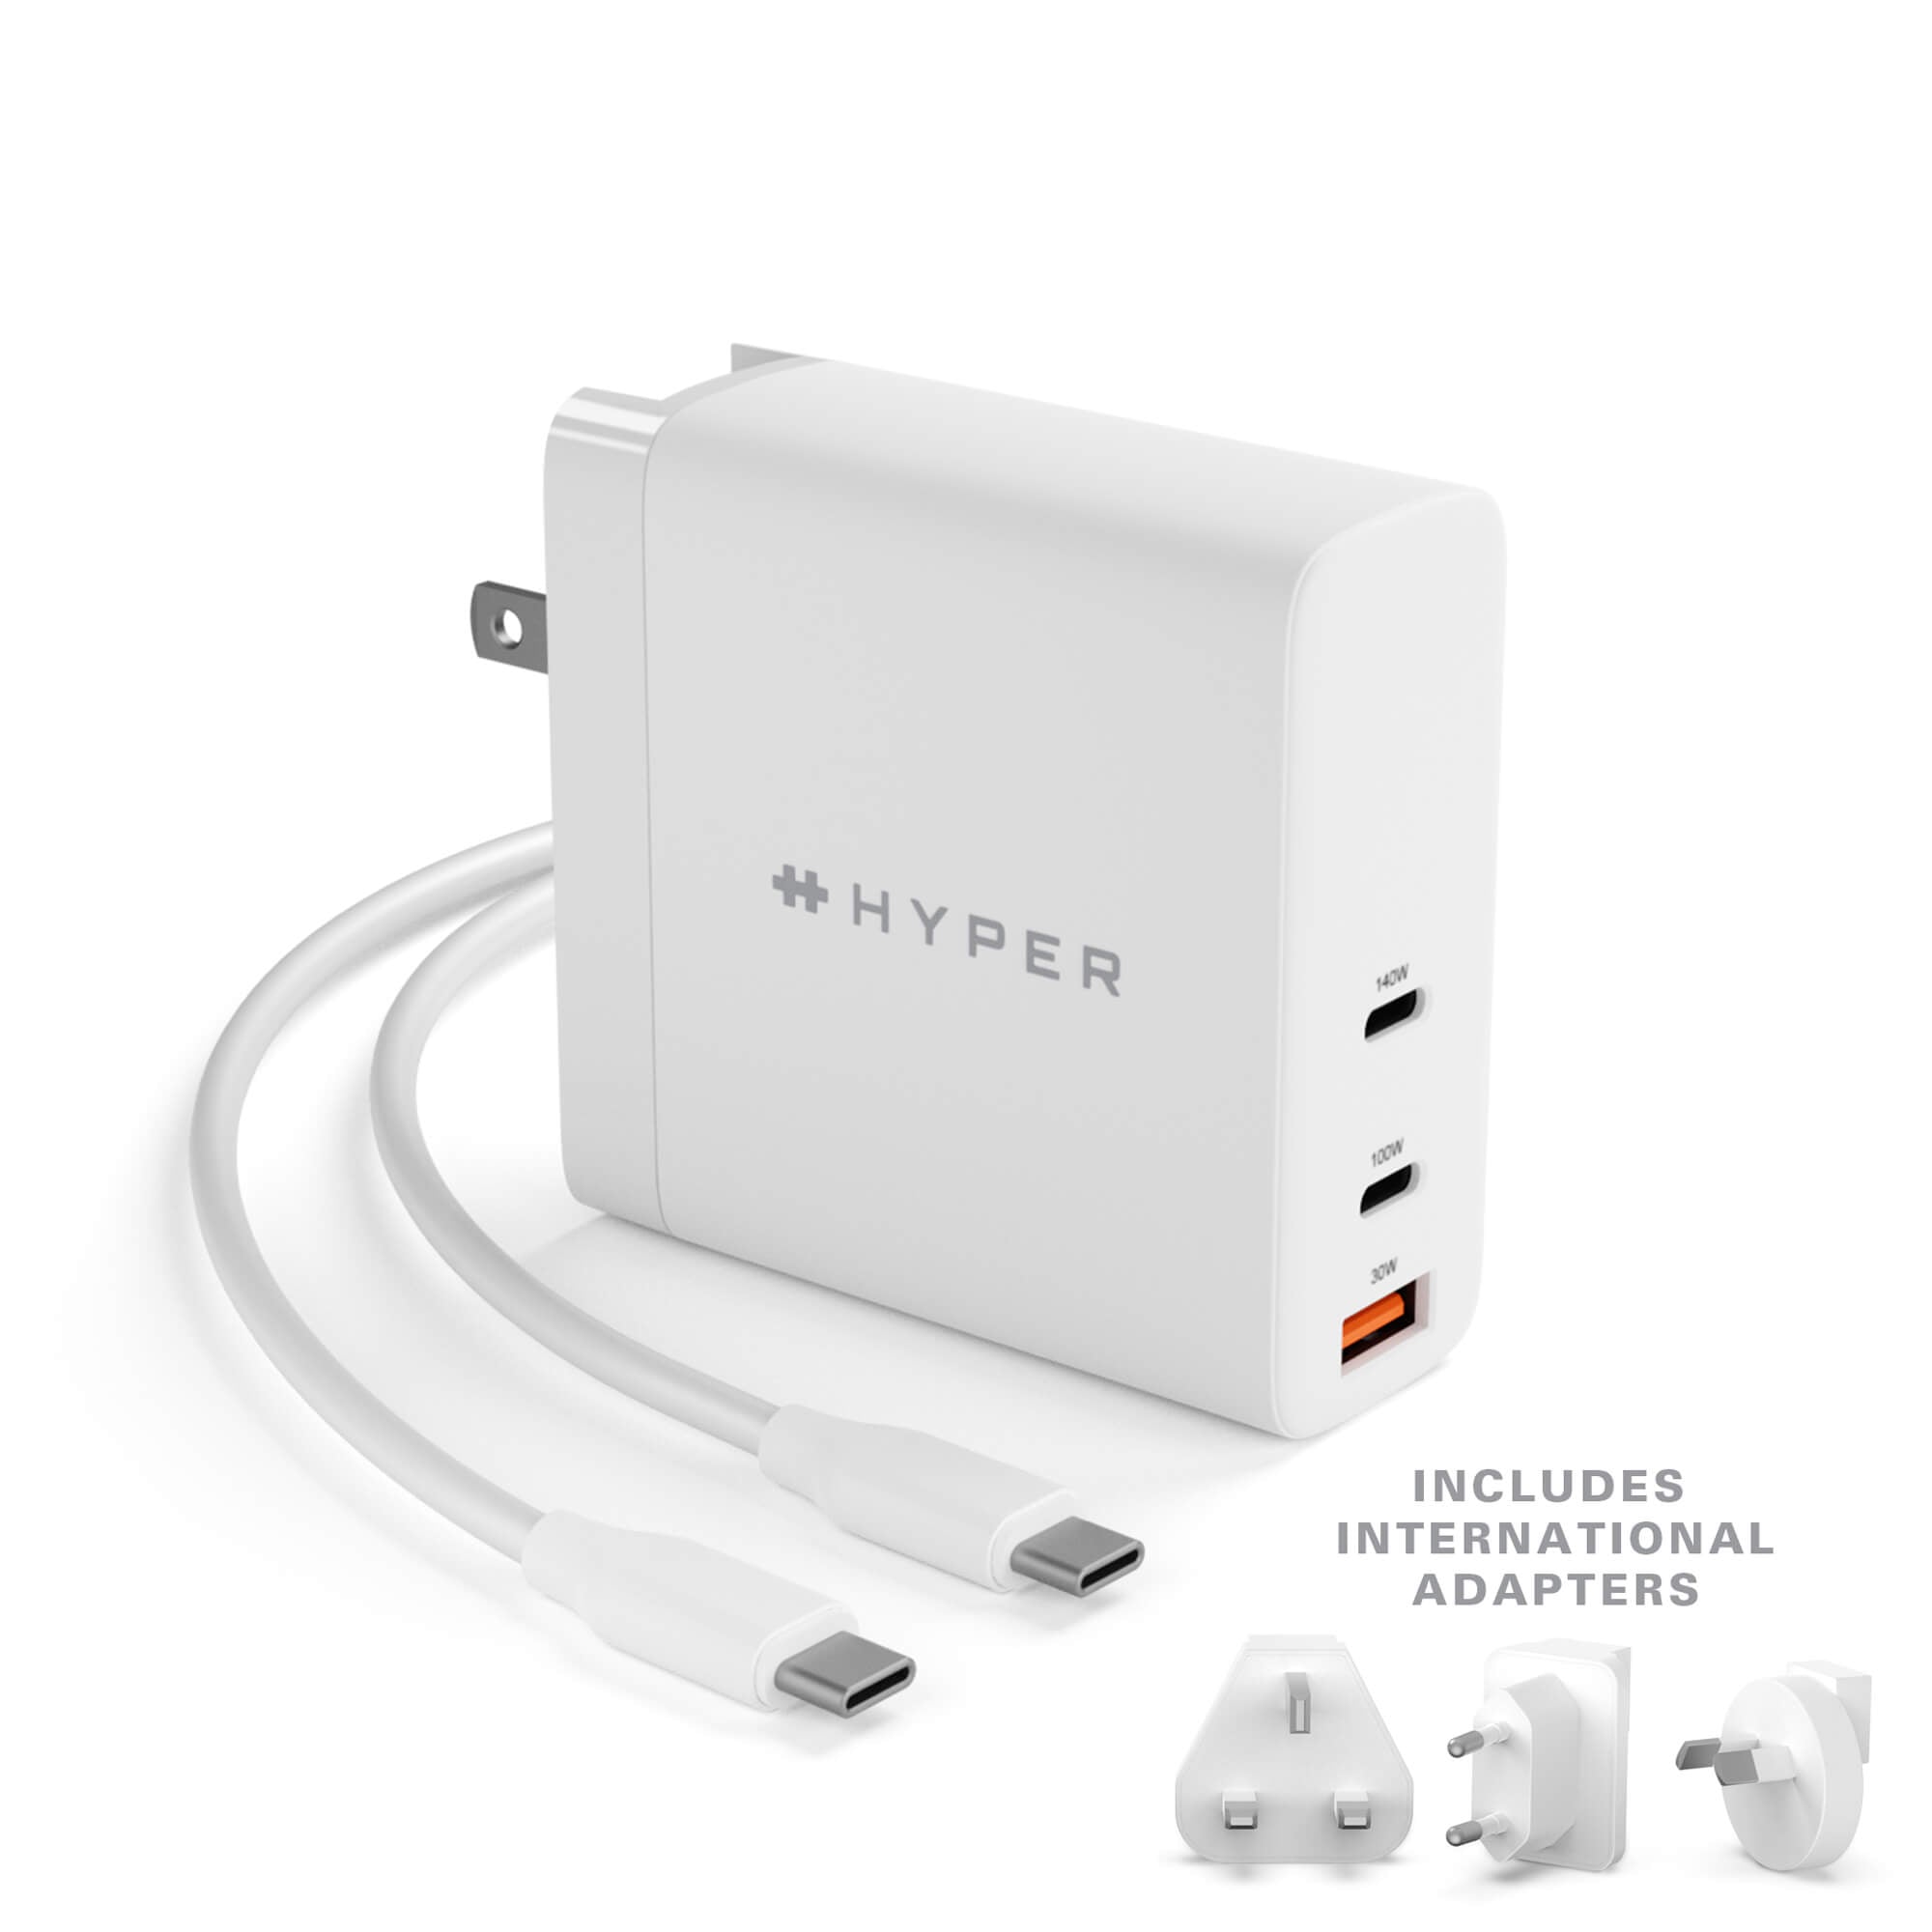 Grand Ja pris HyperJuice 140W PD 3.1 USB-C GaN Charger With Adapters – HyperShop.com